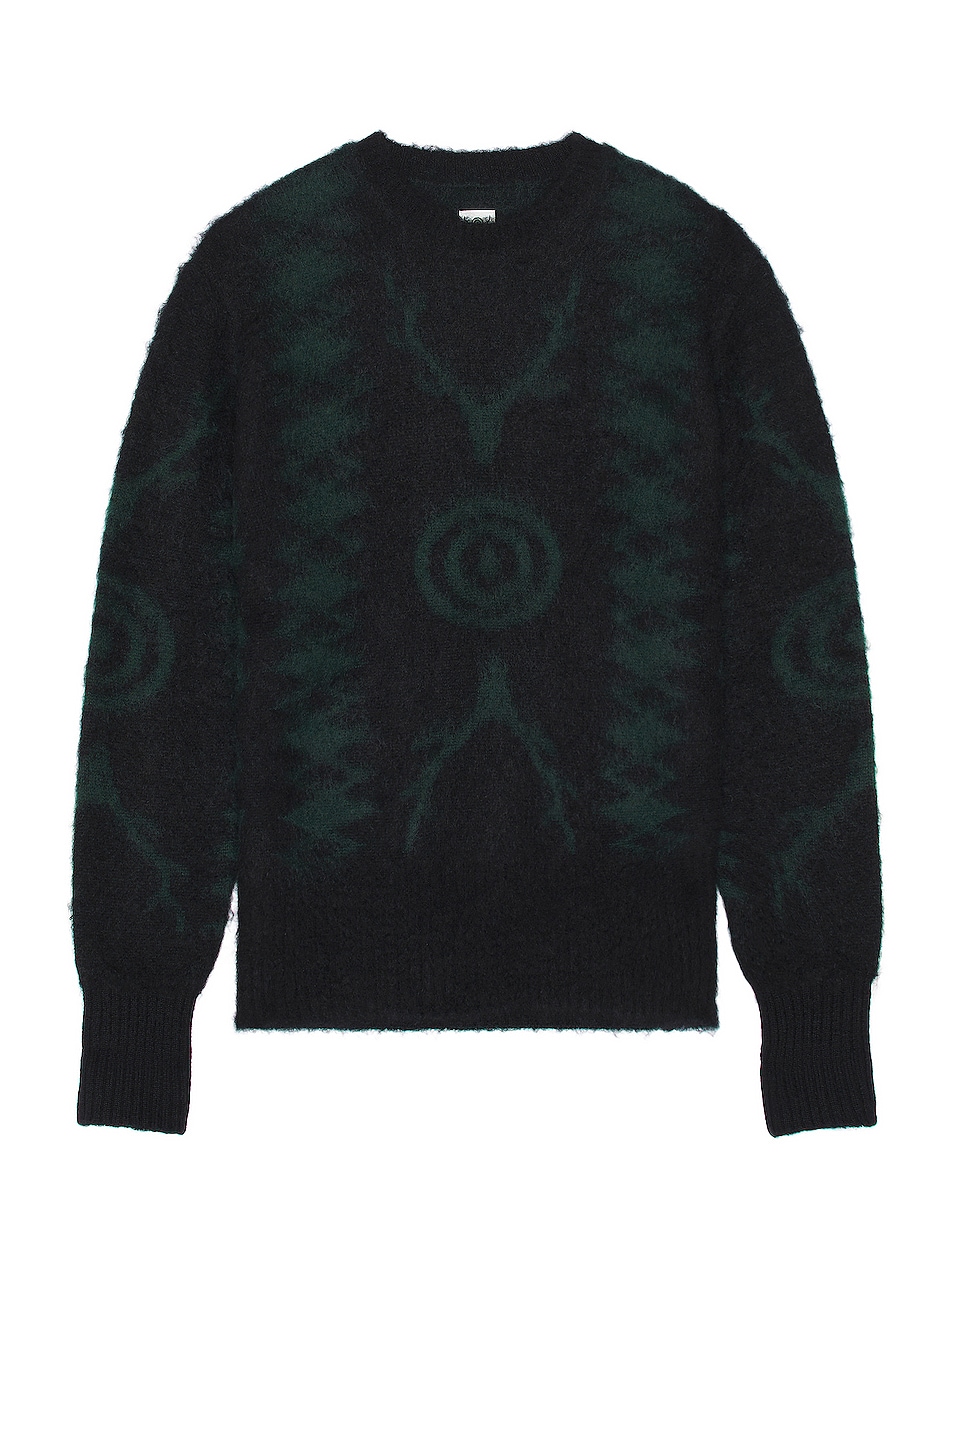 Image 1 of South2 West8 Loose Fit Sweater in Black